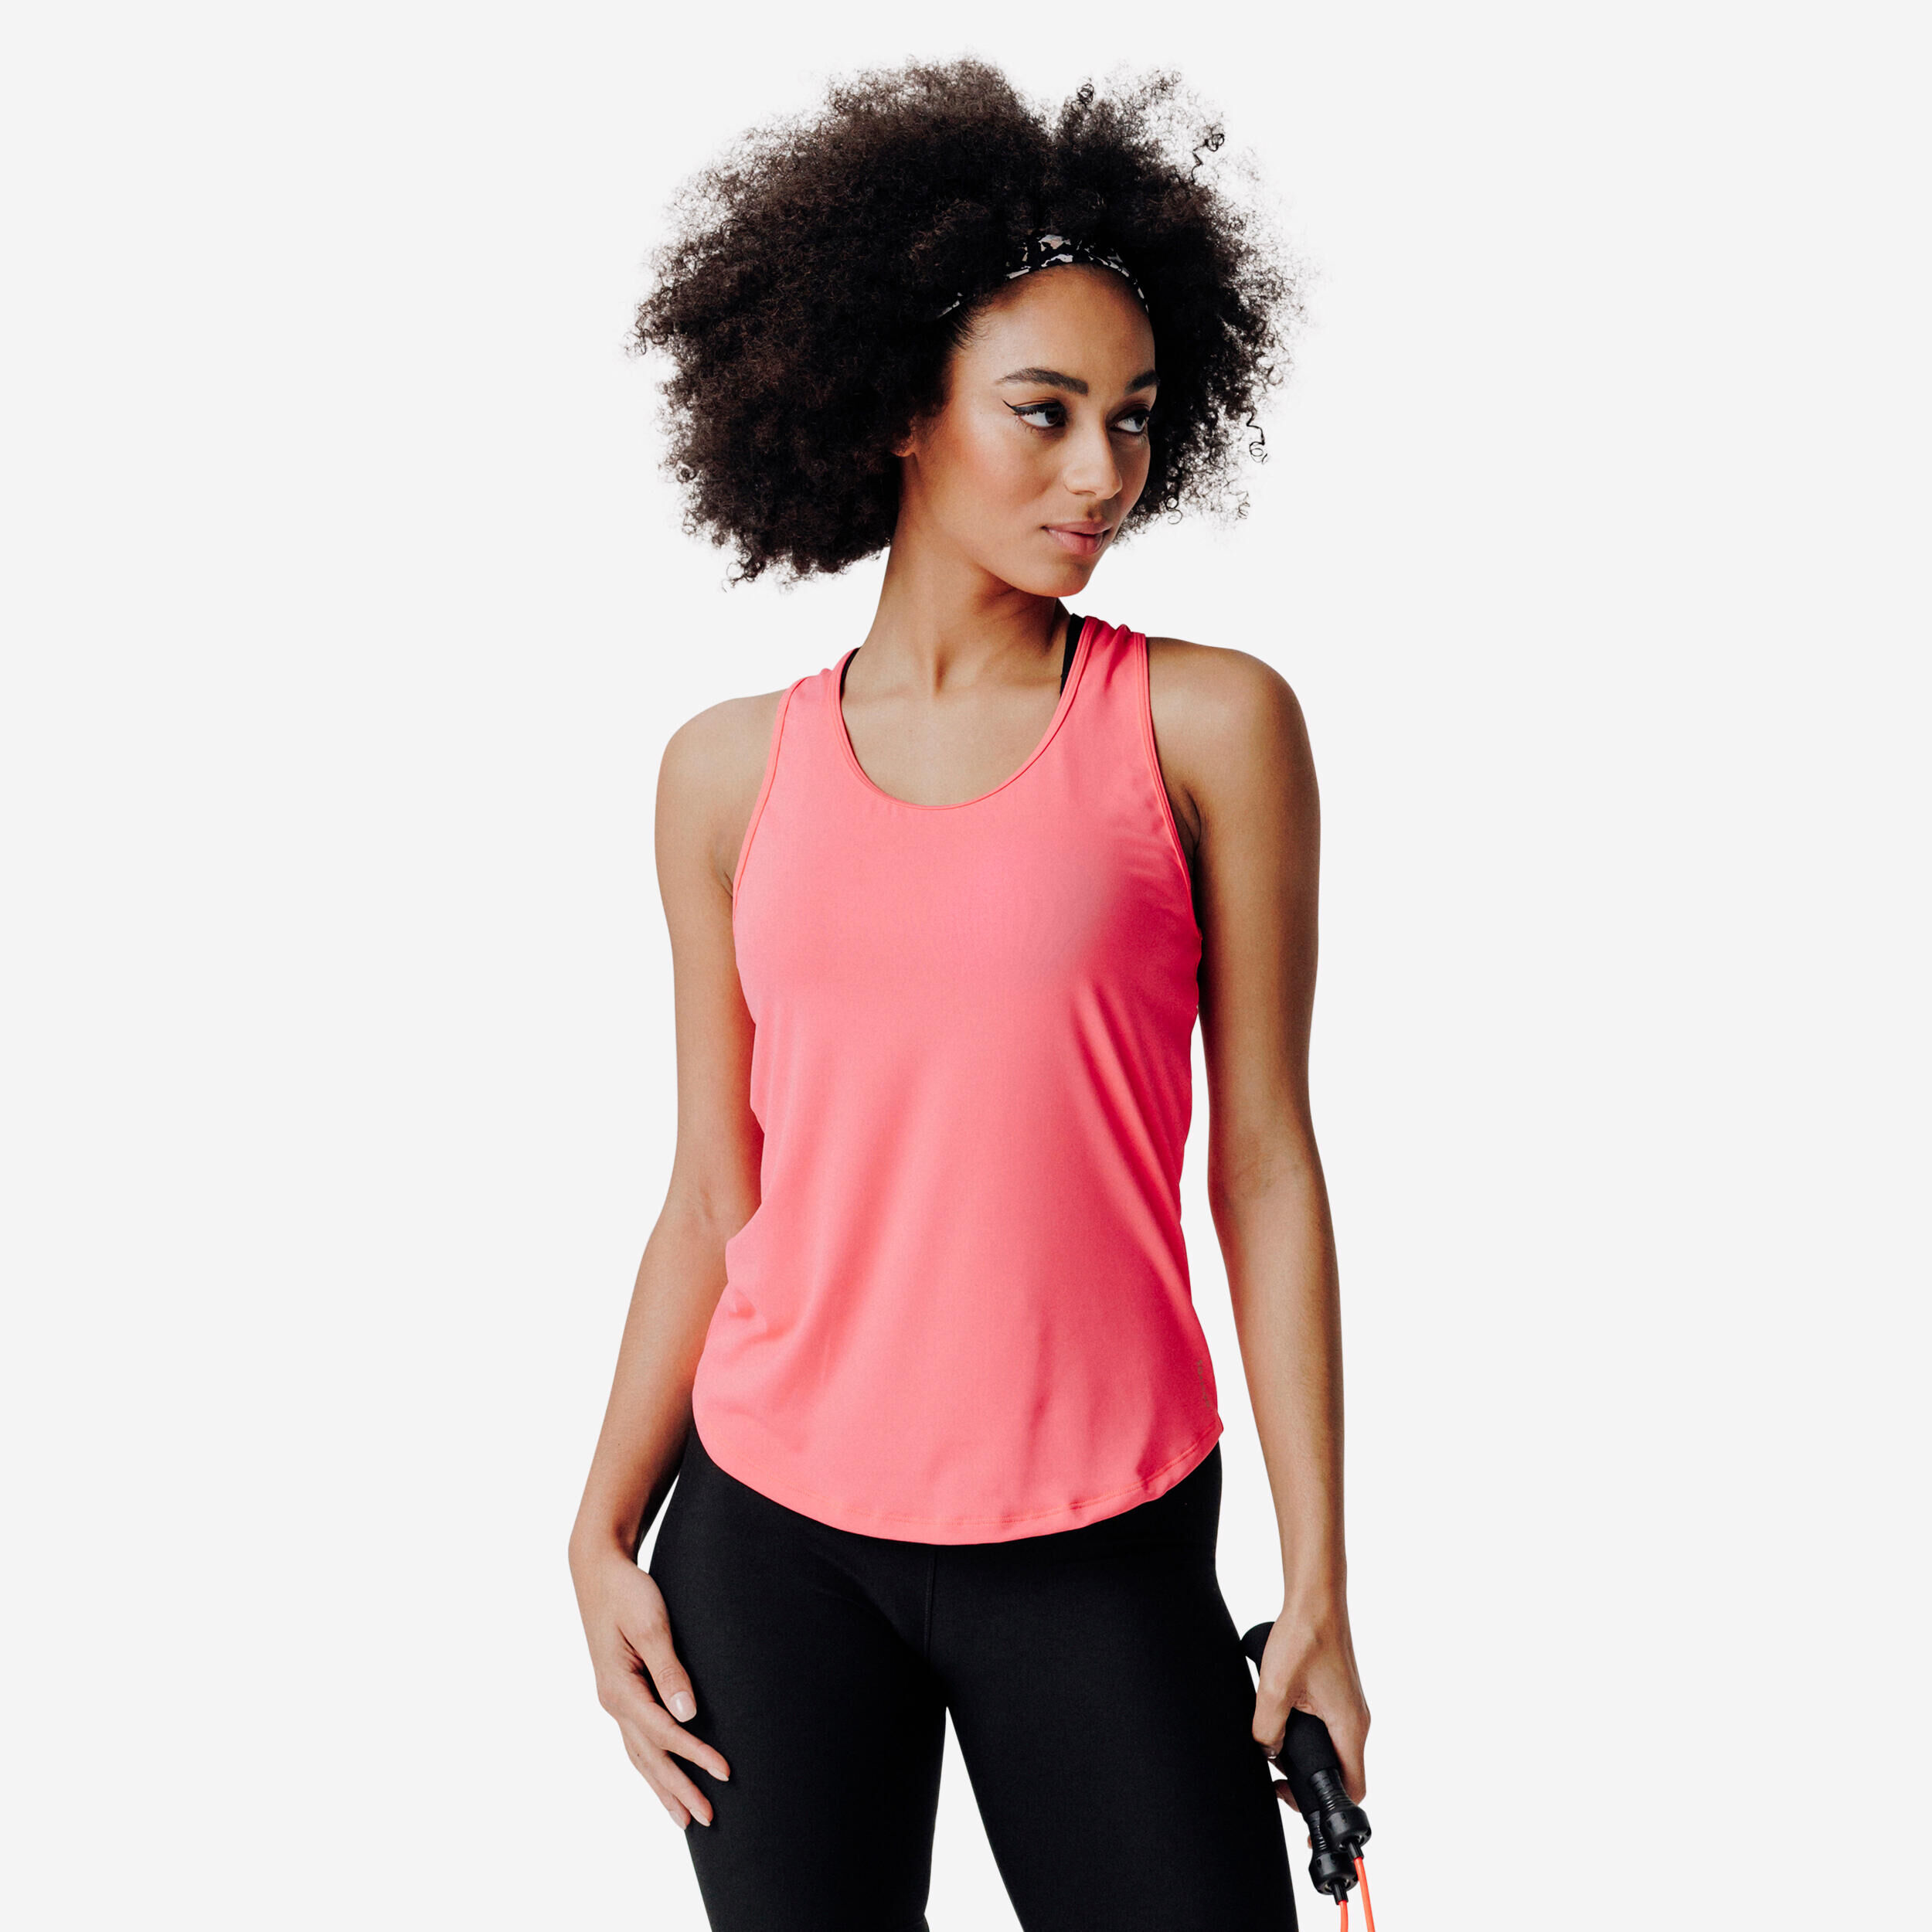 DOMYOS Women's Muscle Back Fitness Cardio Tank Top My Top - Pink